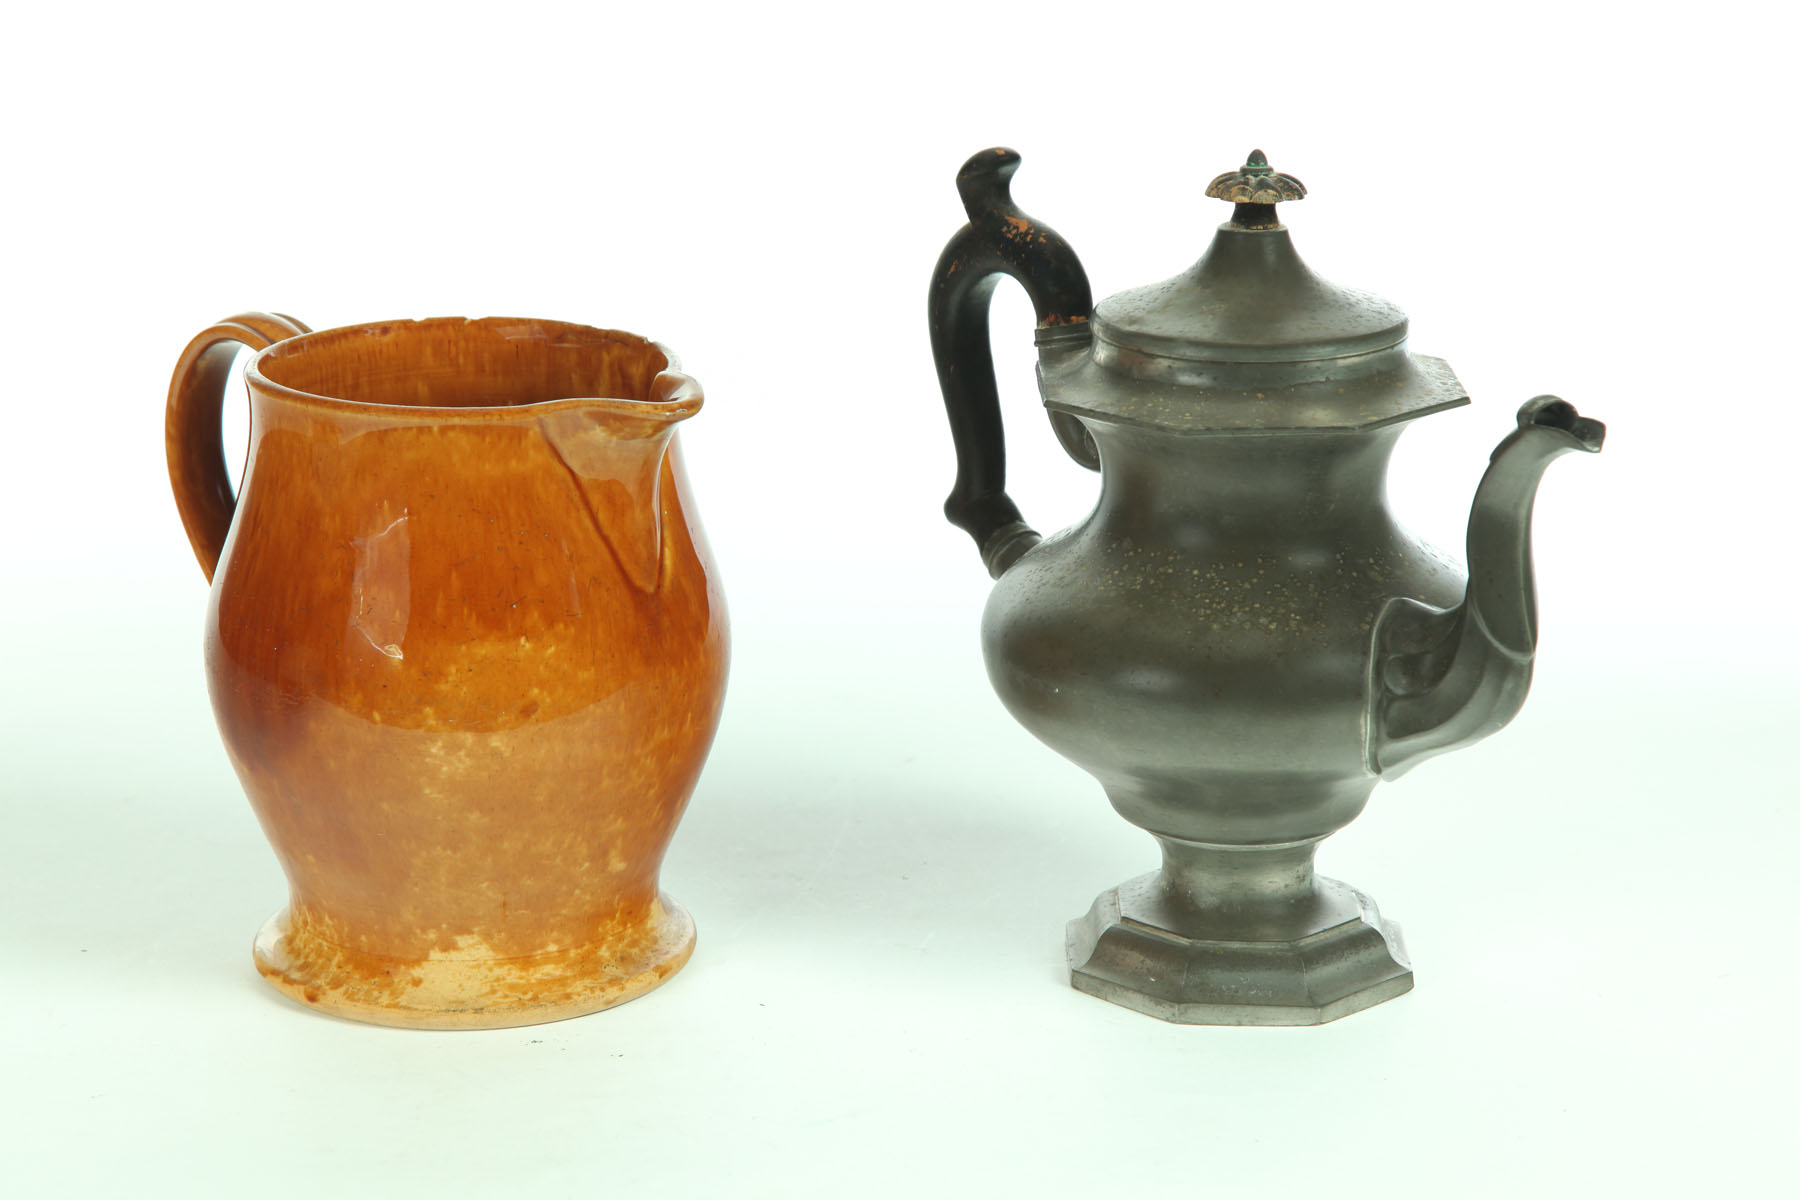 PITCHER AND TEAPOT.  Mid 19th century.